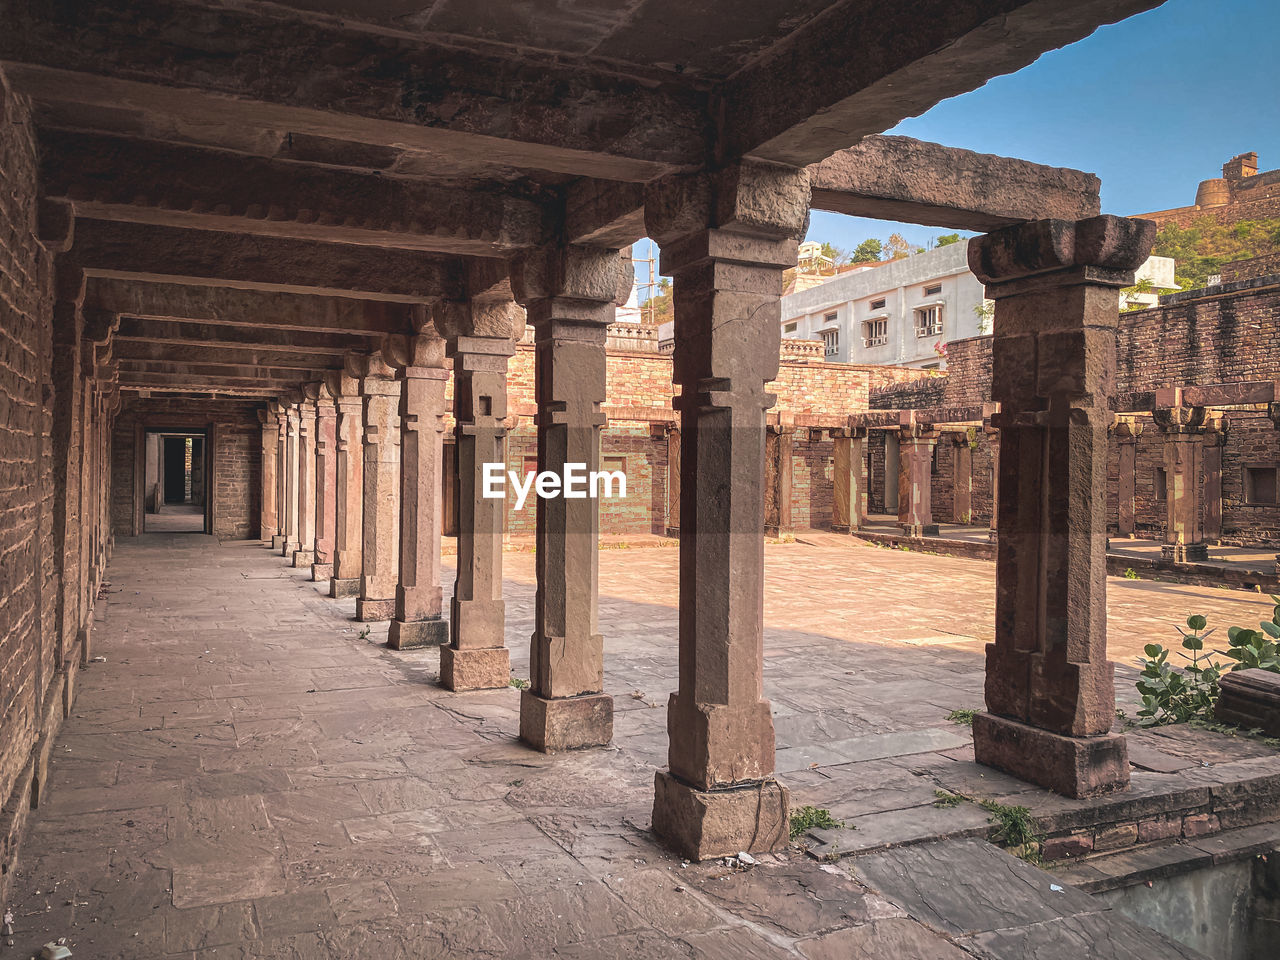 architecture, architectural column, history, built structure, the past, ancient history, ancient, travel destinations, ruins, column, travel, temple, old ruin, temple - building, arch, tourism, old, building, religion, nature, no people, ancient civilization, colonnade, arcade, city, outdoors, building exterior, corridor, day, belief, tradition